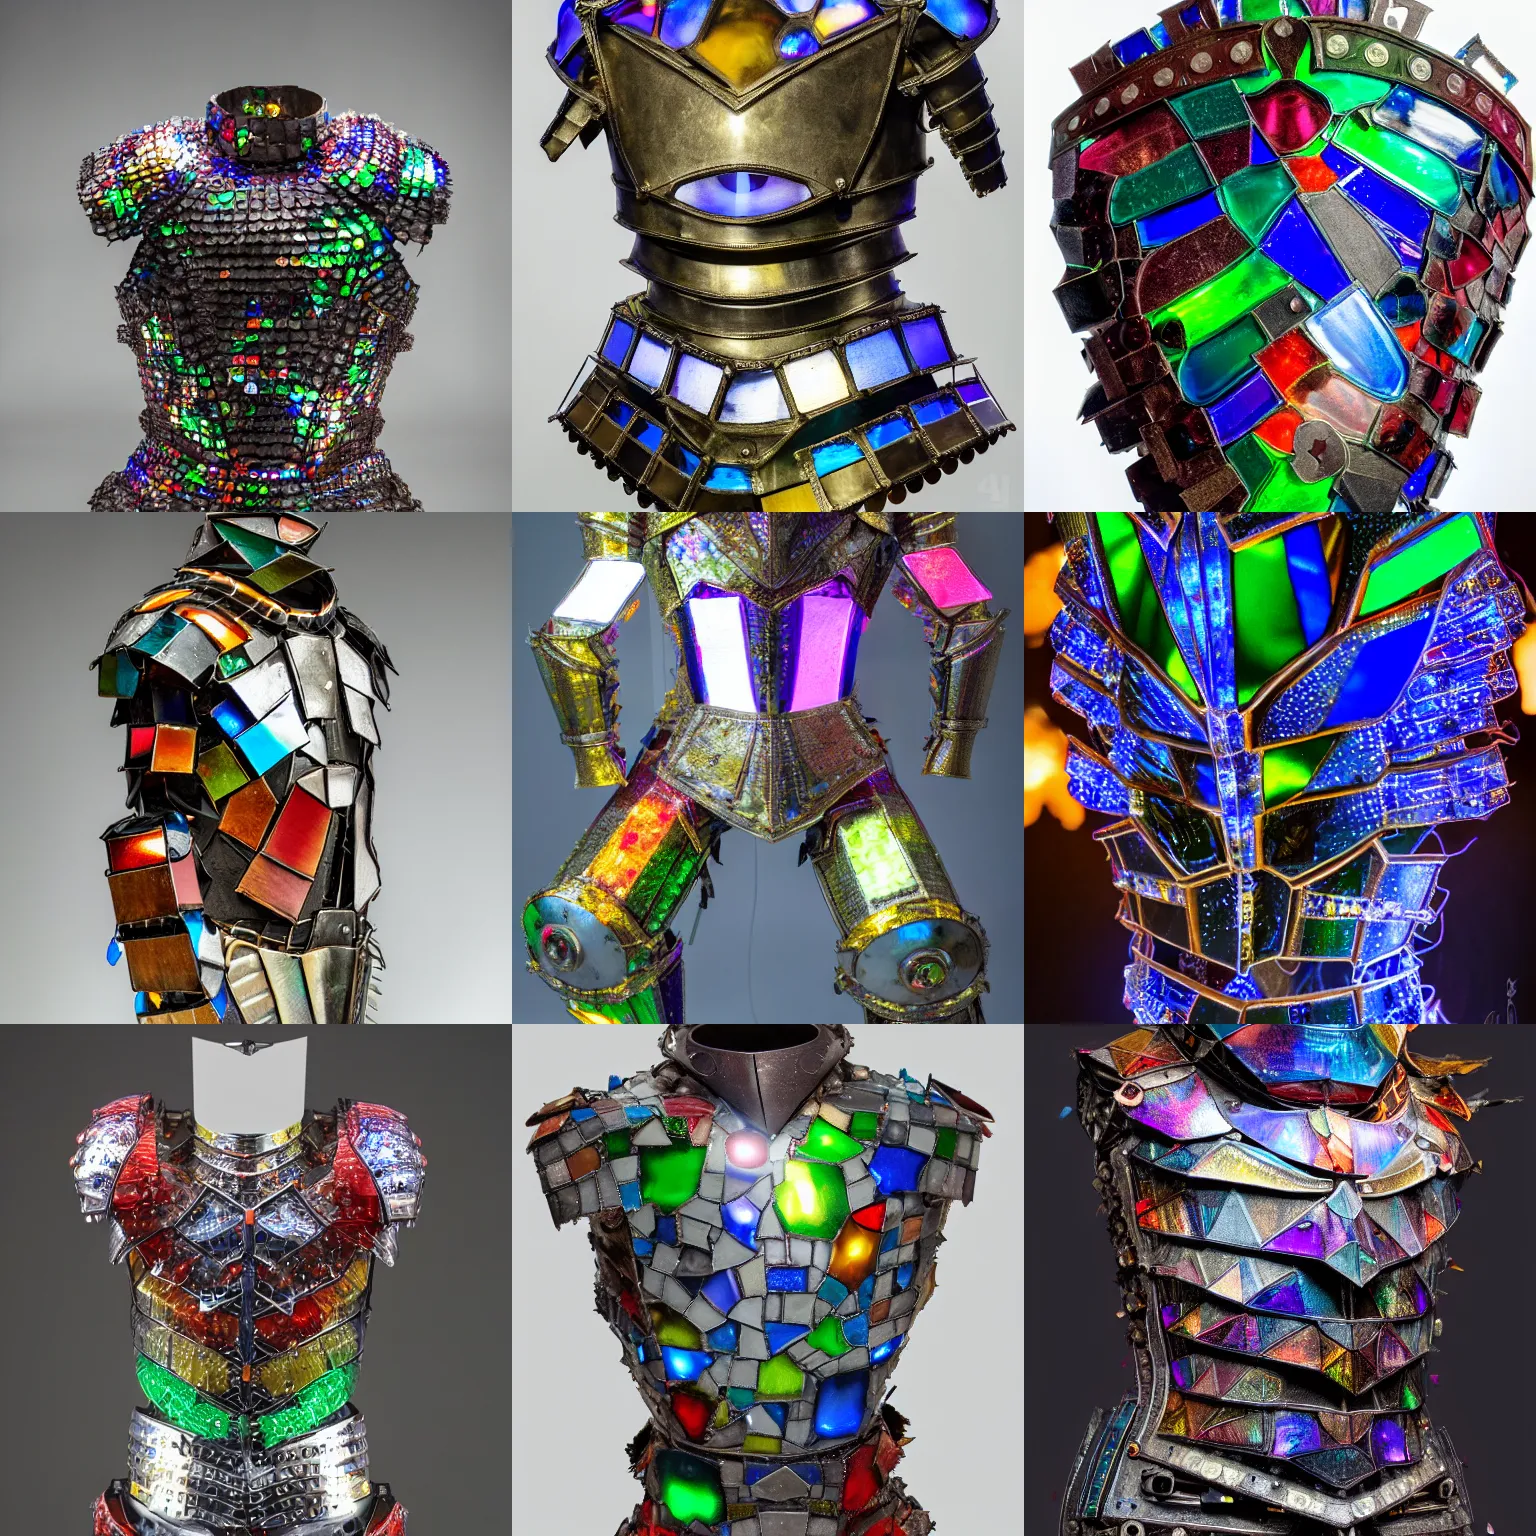 The artists have been replaced by robots - Chris Glass